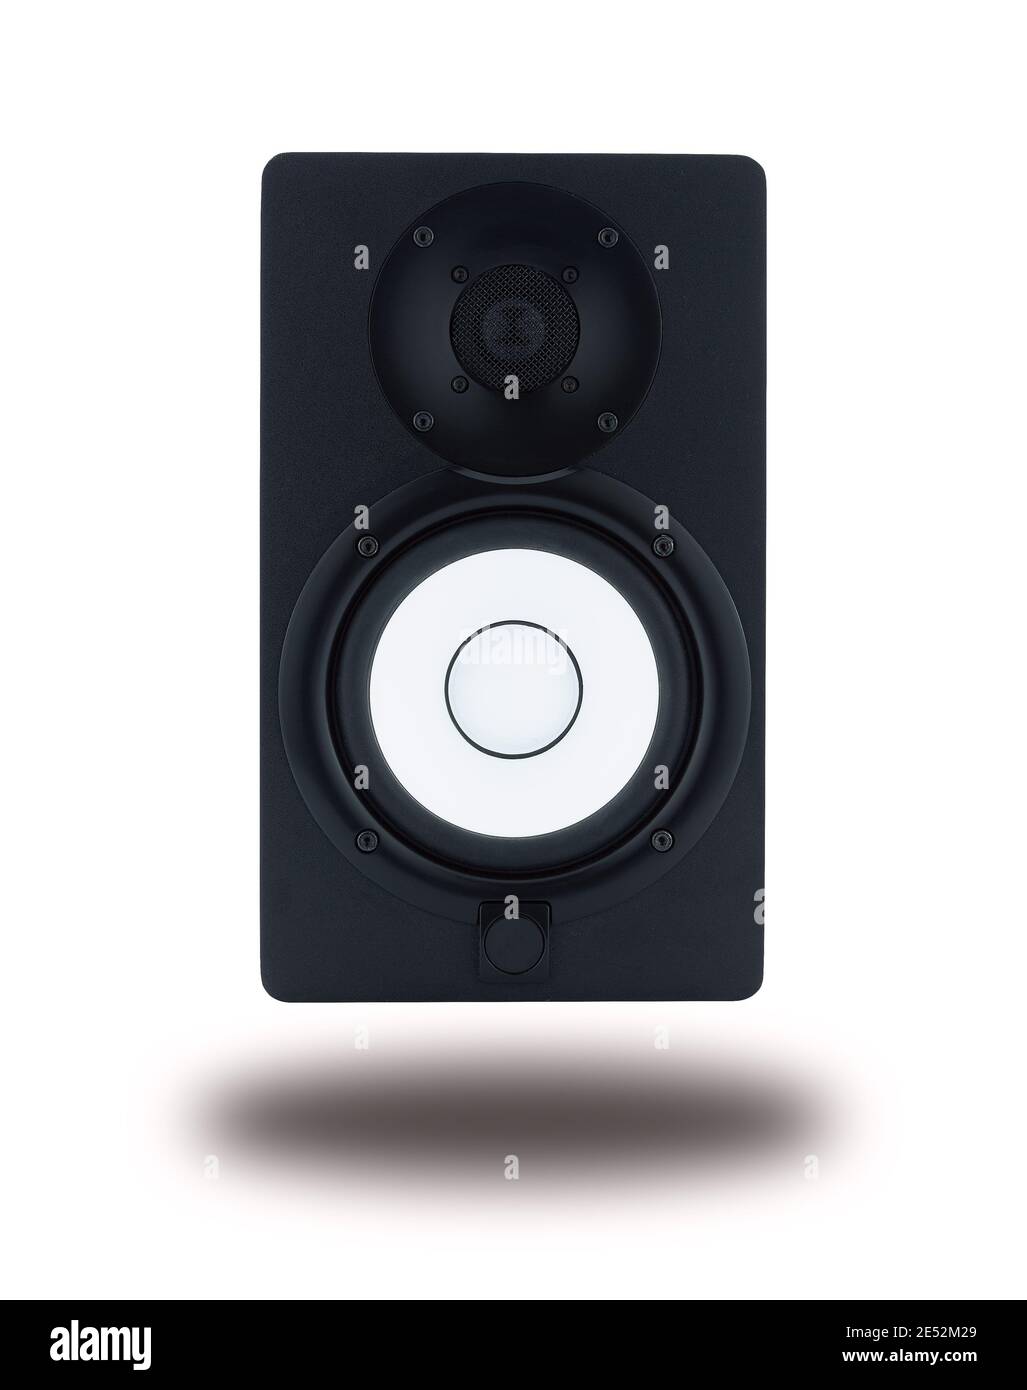 Front view of professional high quality monitor speakers for sound recording, mixing, and mastering in studio in black wooden casing isolated . Stock Photo